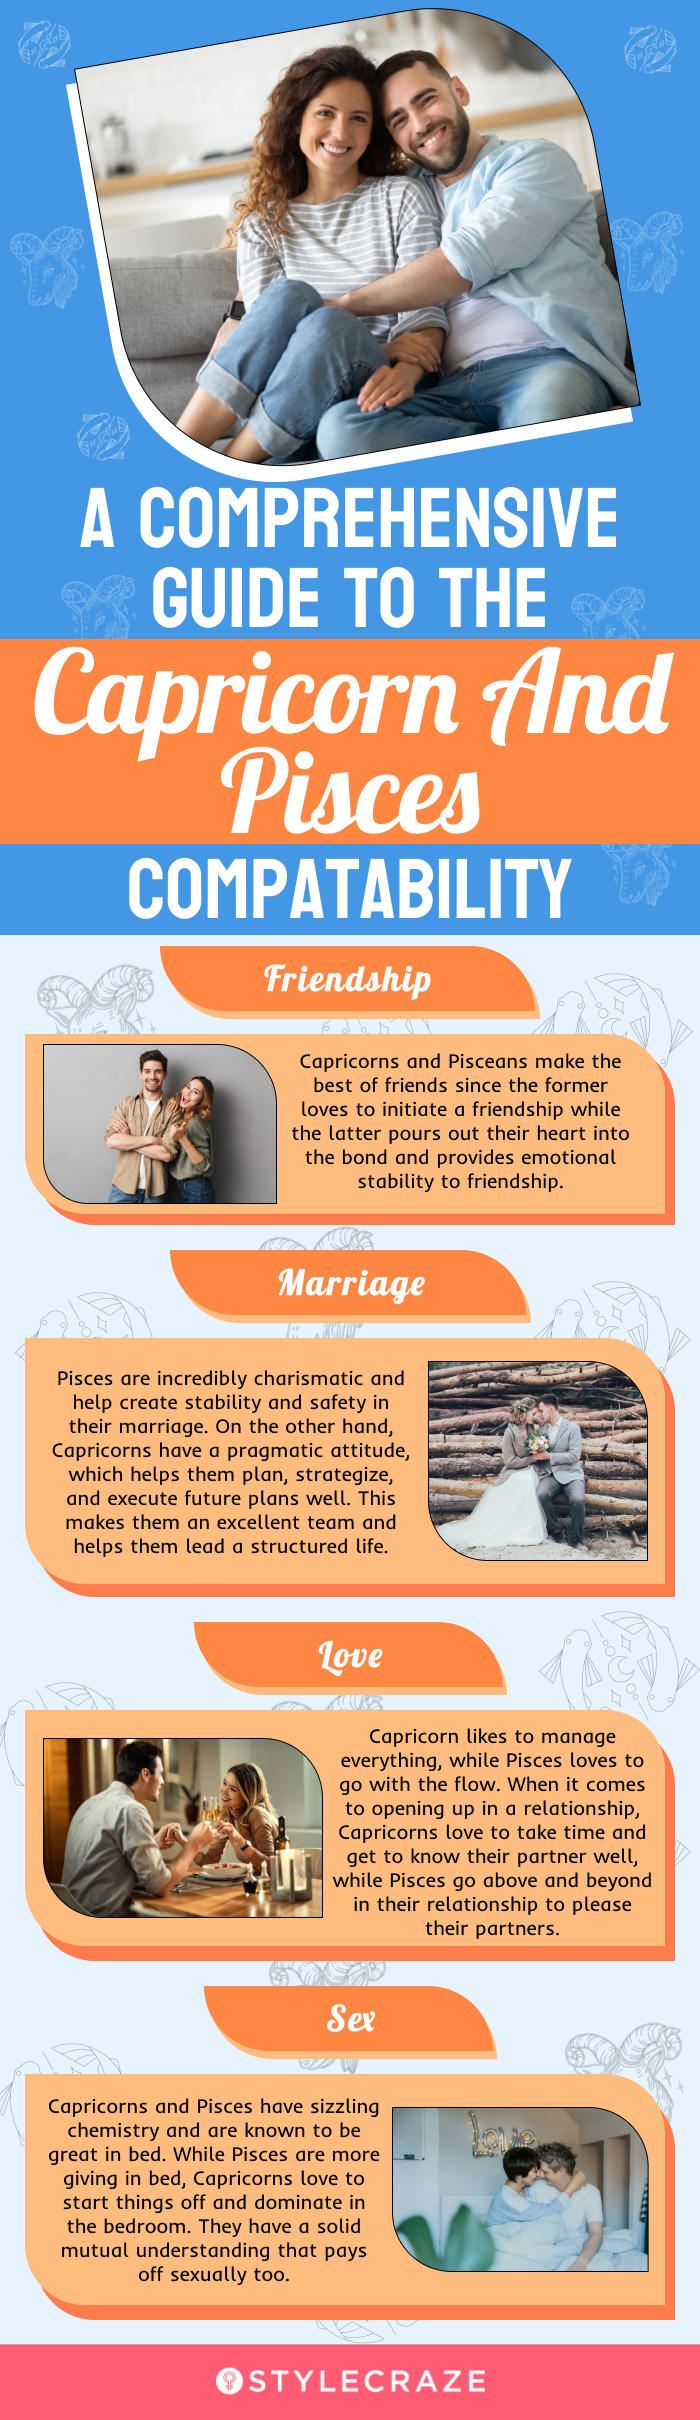 a comprehensive guide to the capricorn and pisces compatibility (infographic)